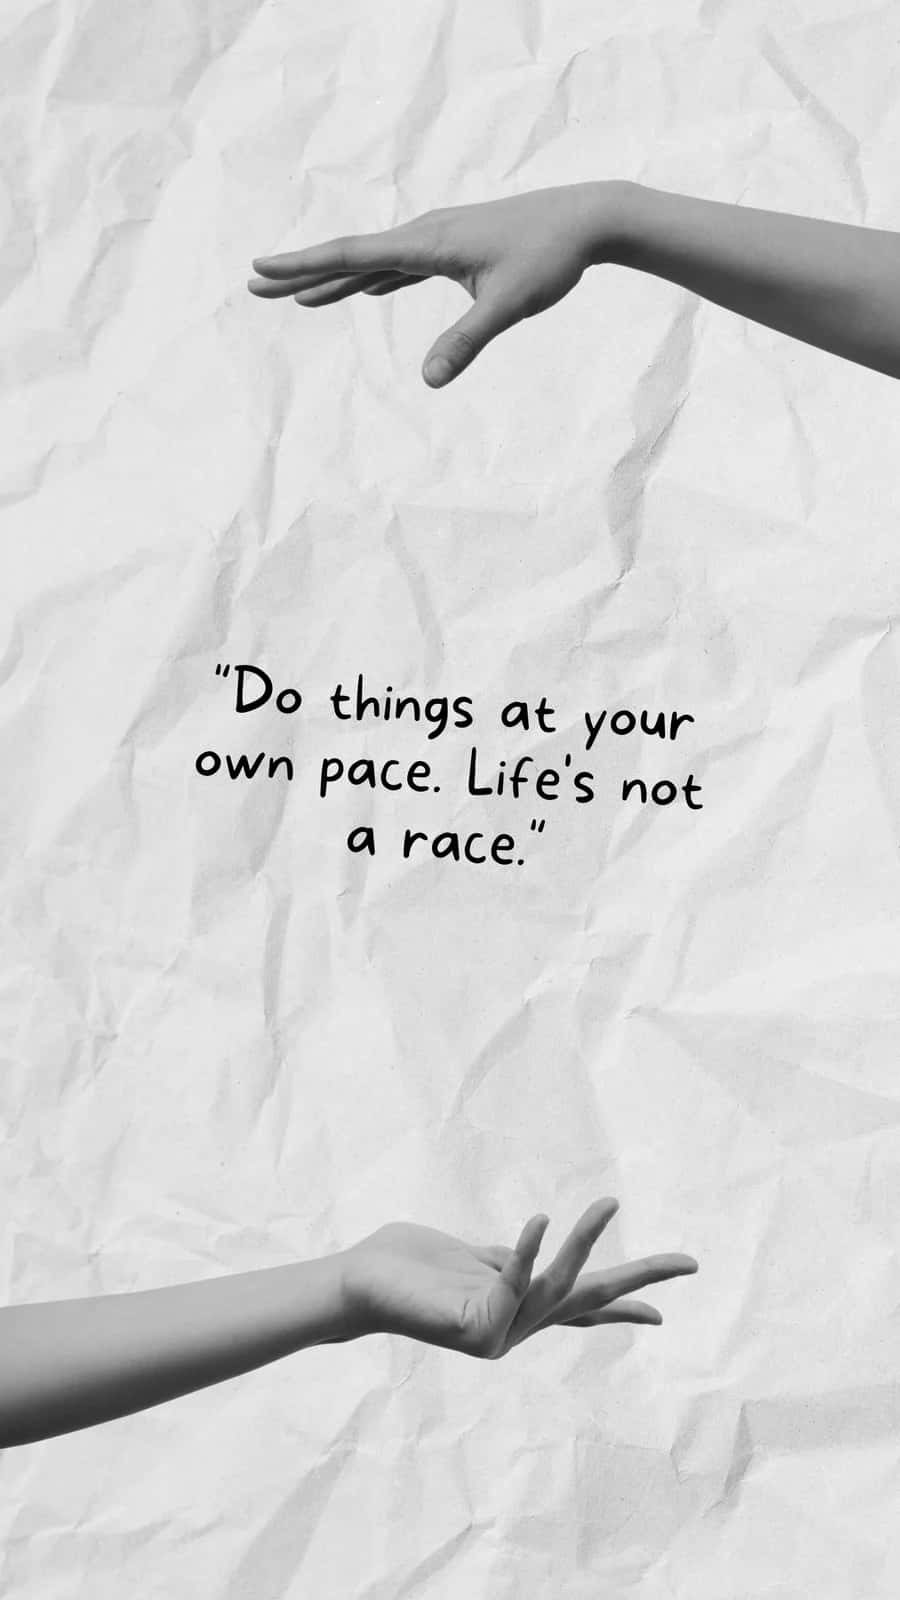 Life Pace Not A Race Quote Wallpaper